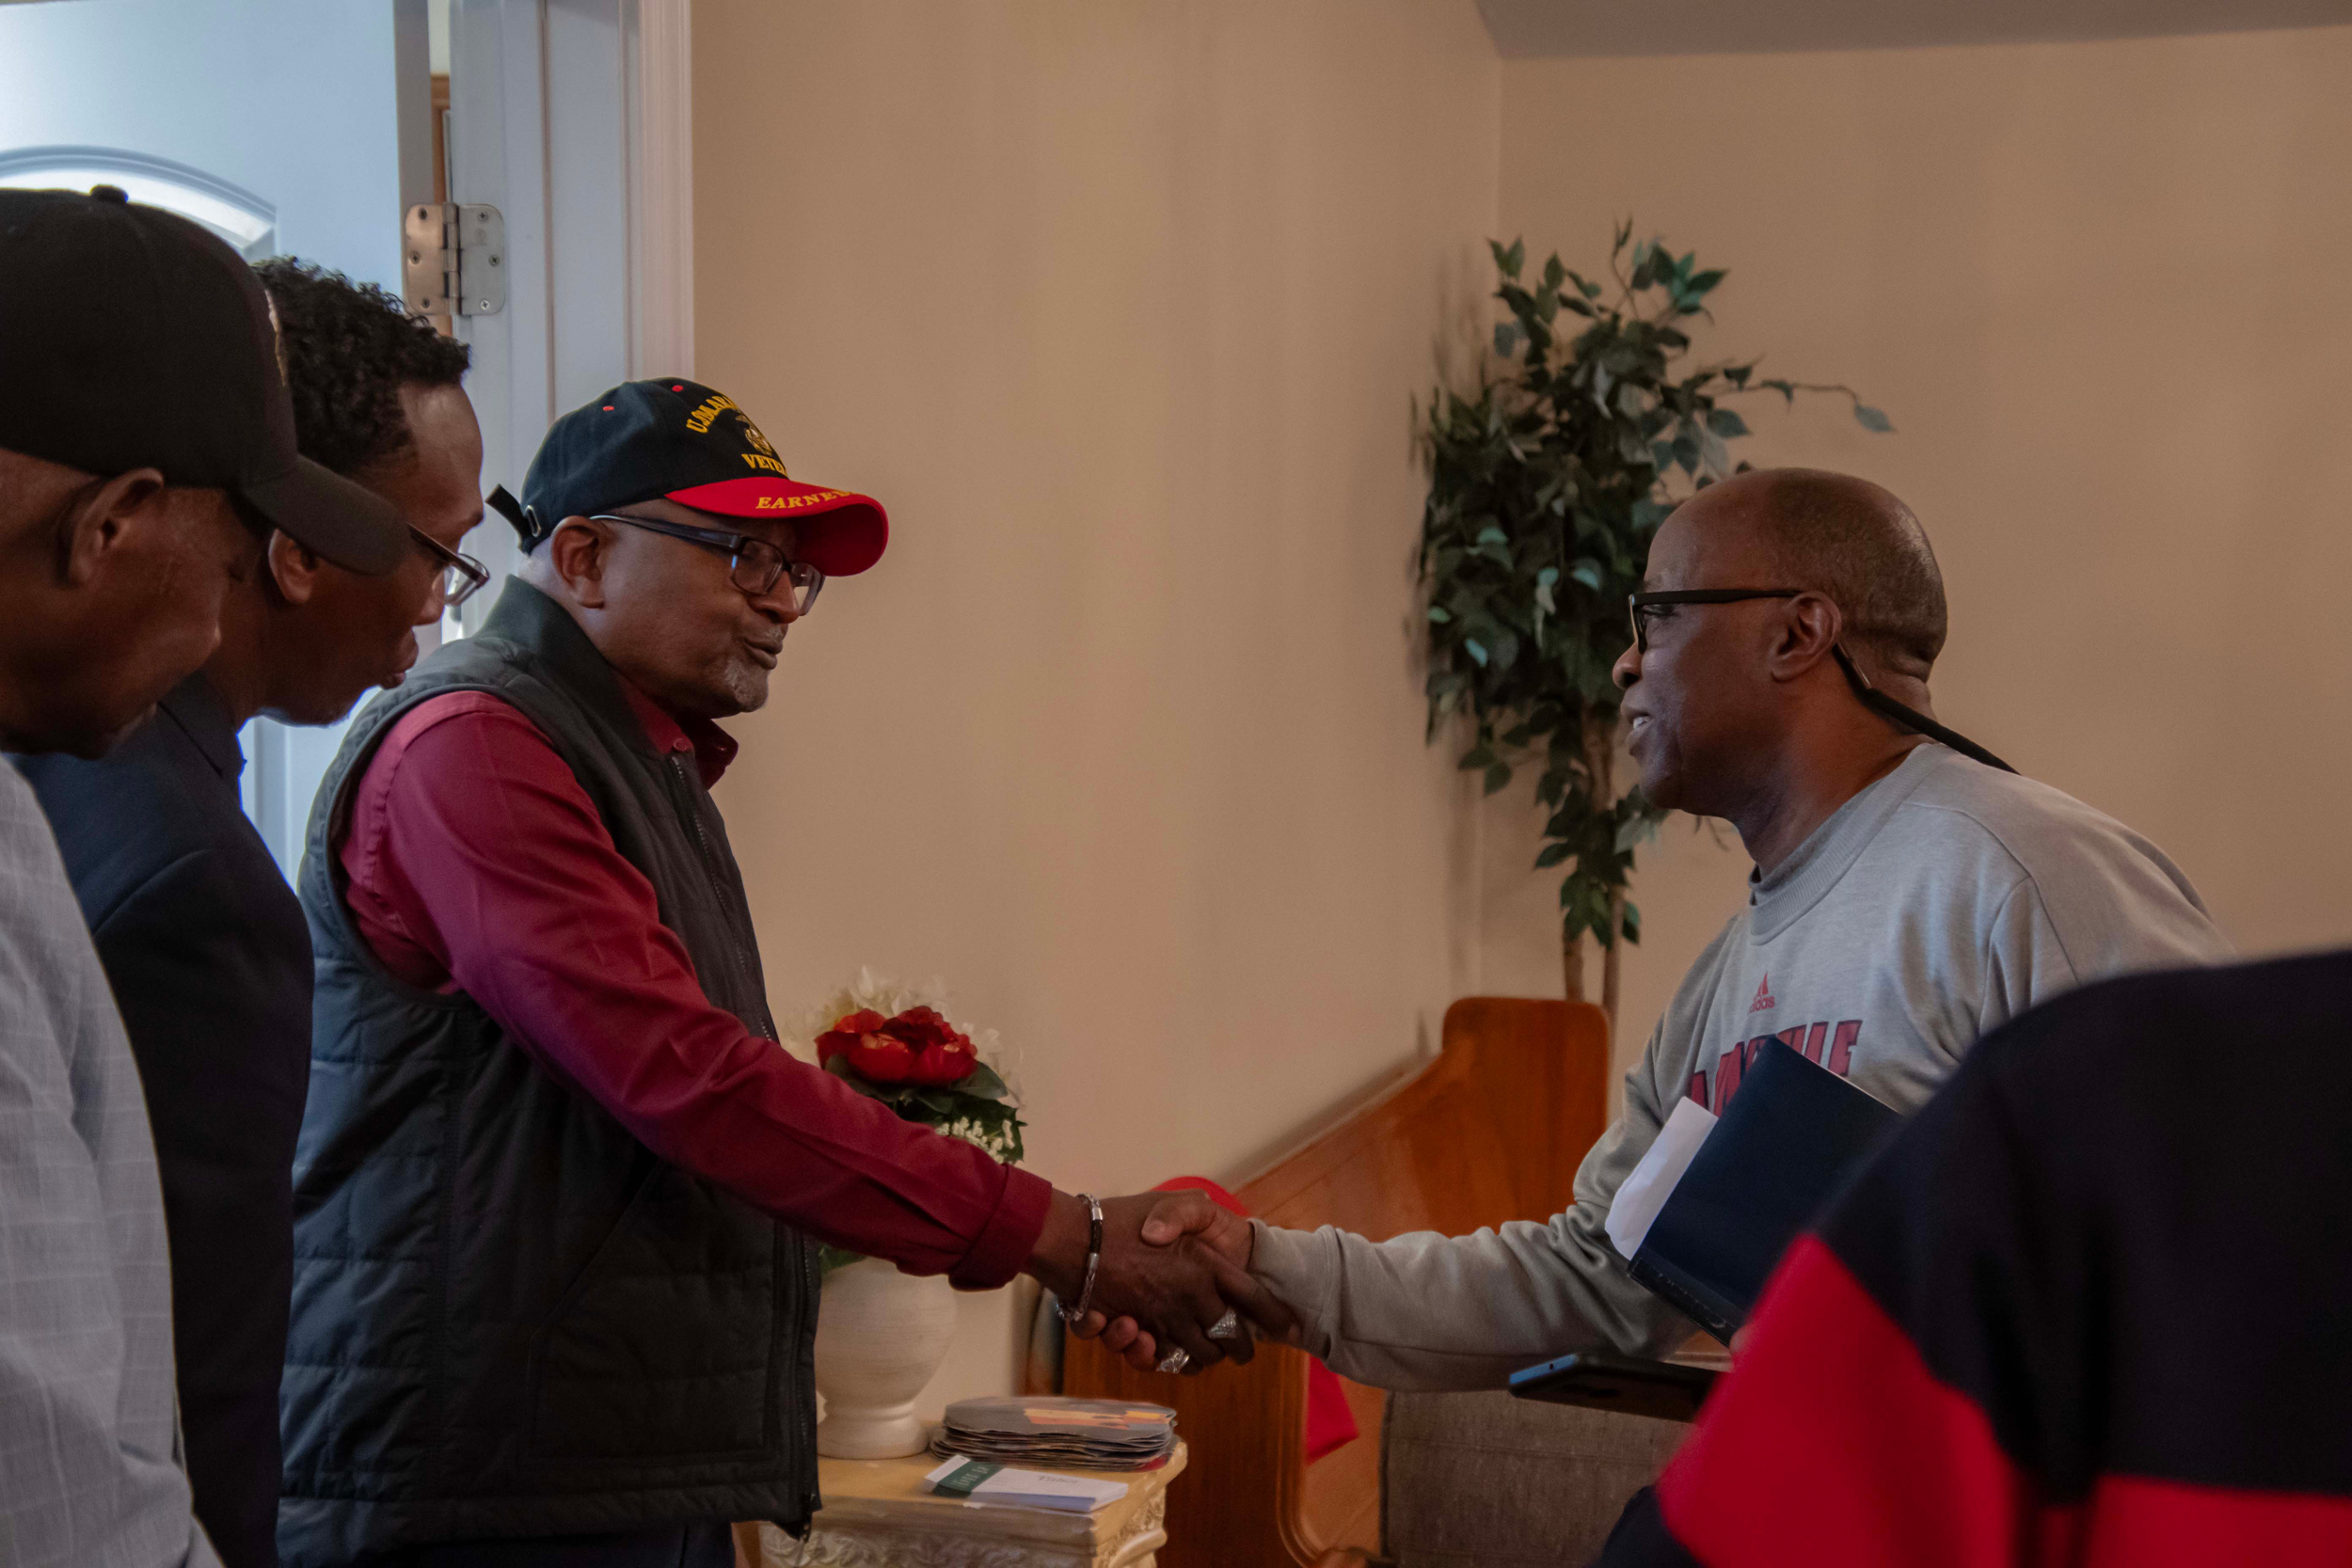 Dr. Robert Bullard, Pastor Timothy Williams, and Willie Horstead meet with Athens residents. Photo credit: Lee Hedgepeth/Inside Climate News